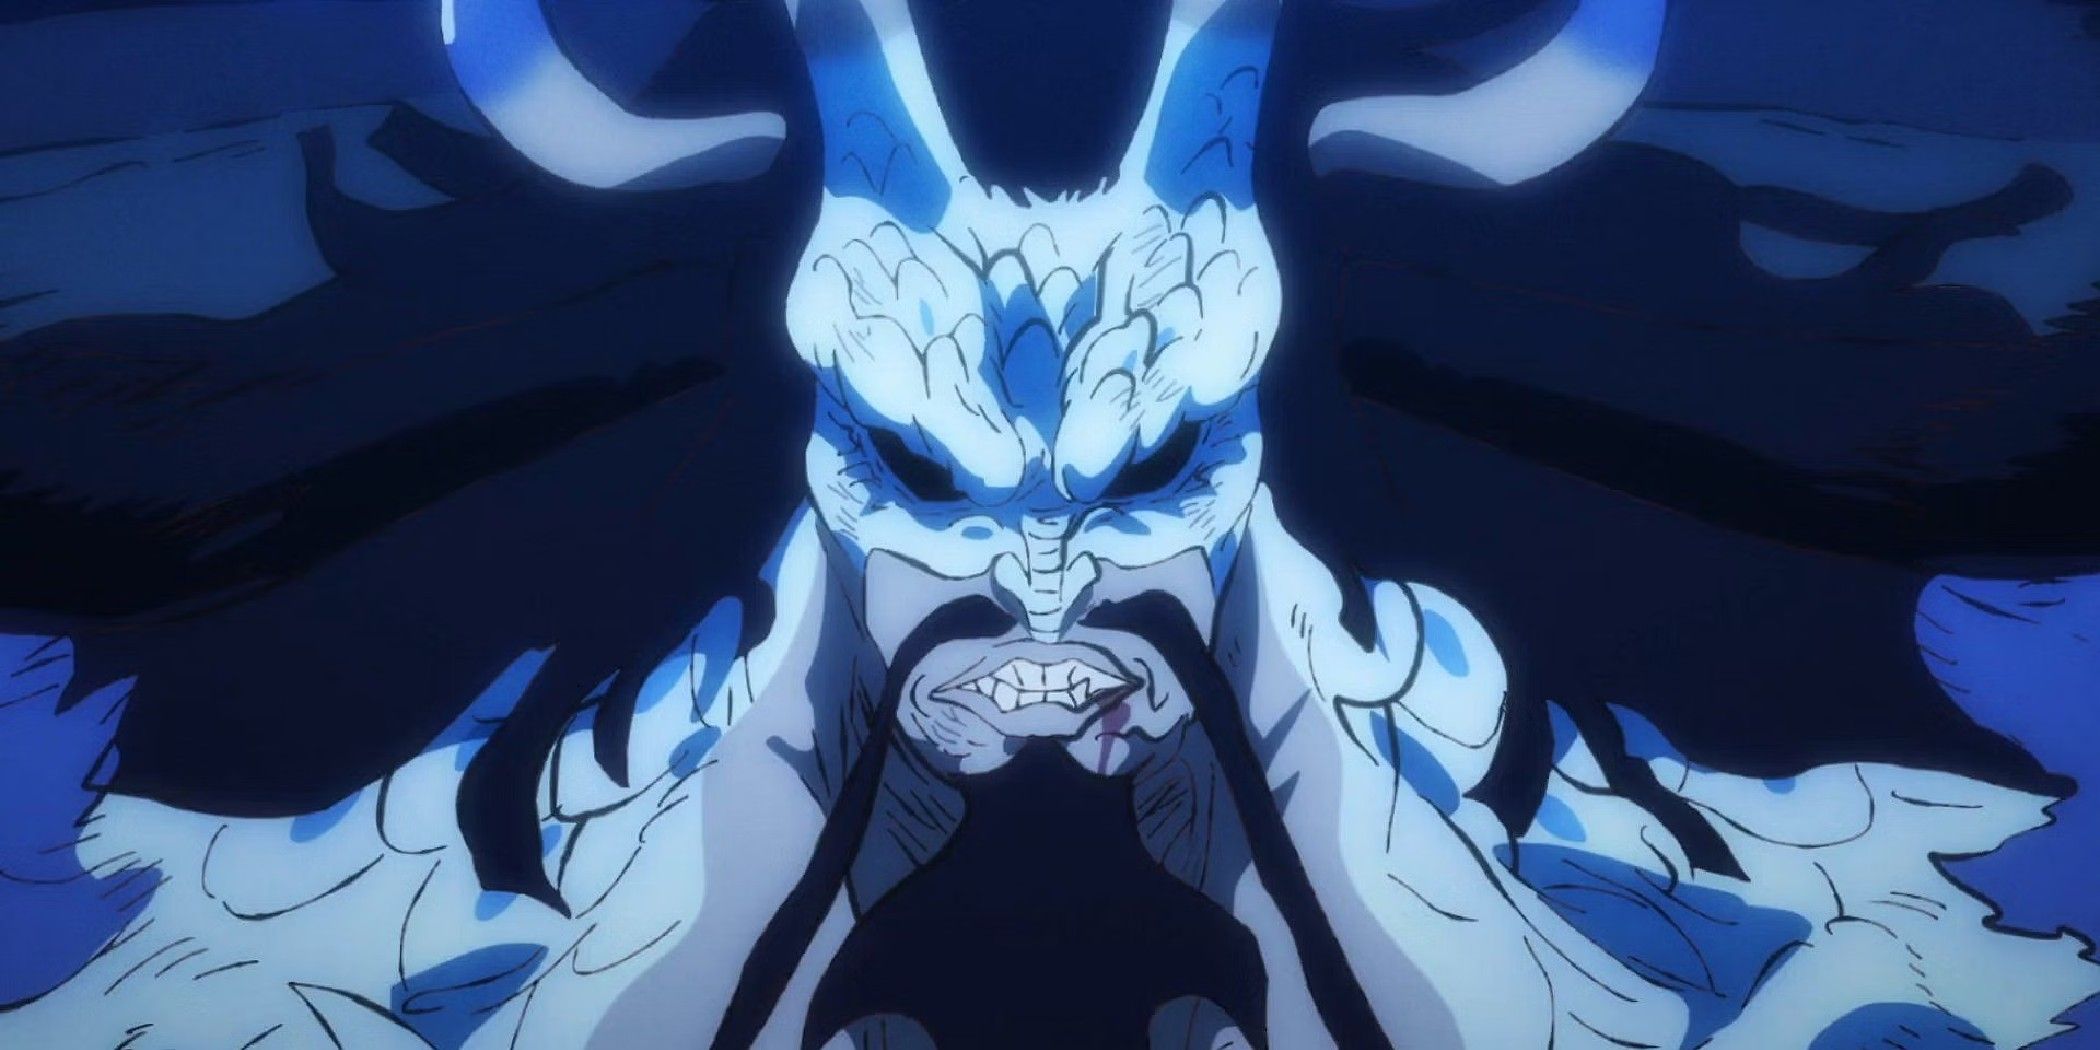 Angry Kaido in his semi-dragon form from the One Piece anime.